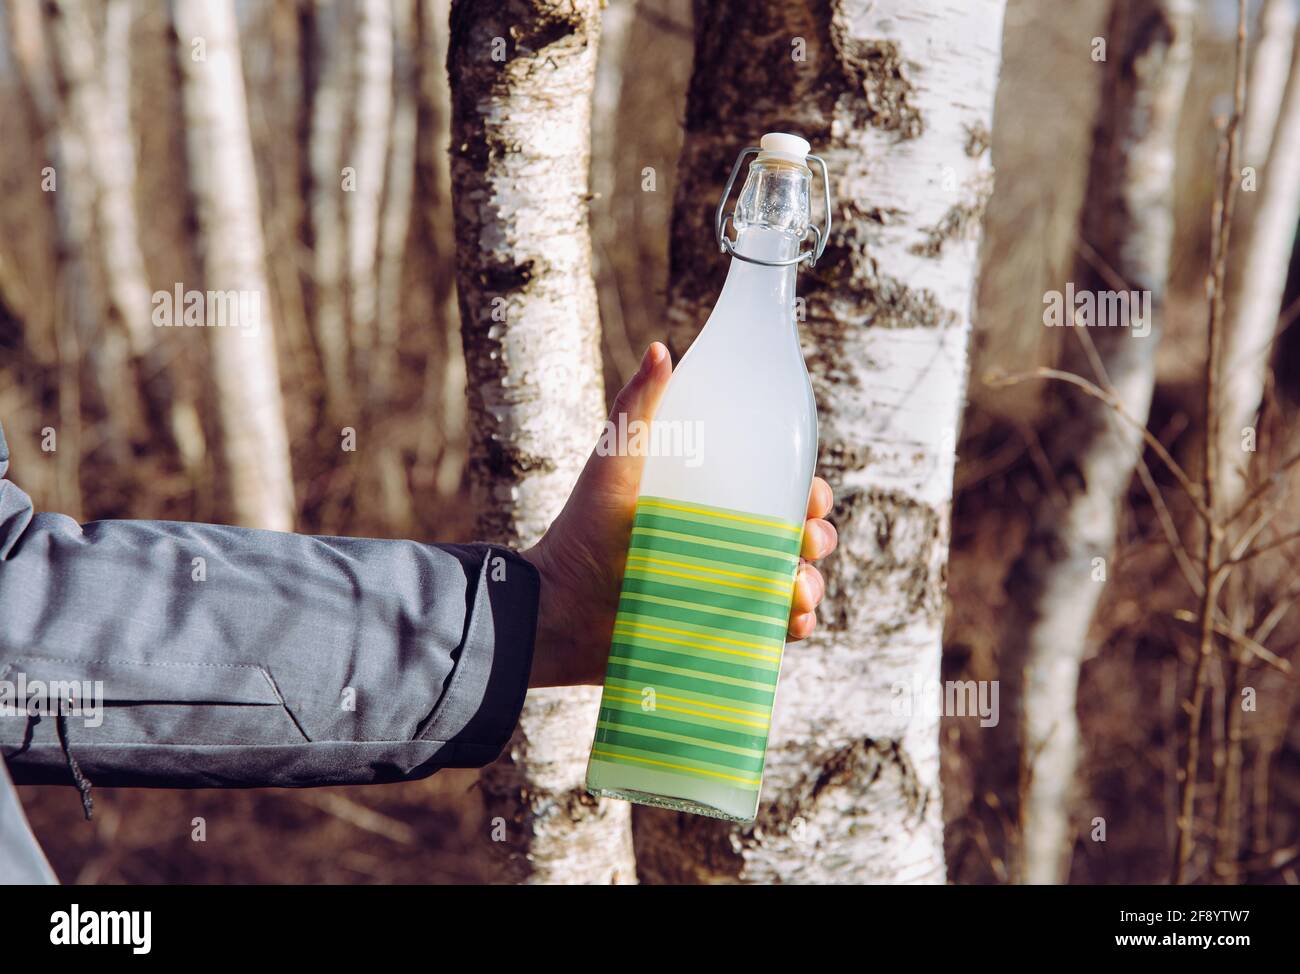 Fermented birch(Betula) sap in glass container bottle. Hand holding healthy 3 days fermented drink with flour and sugar in bottle. Stock Photo